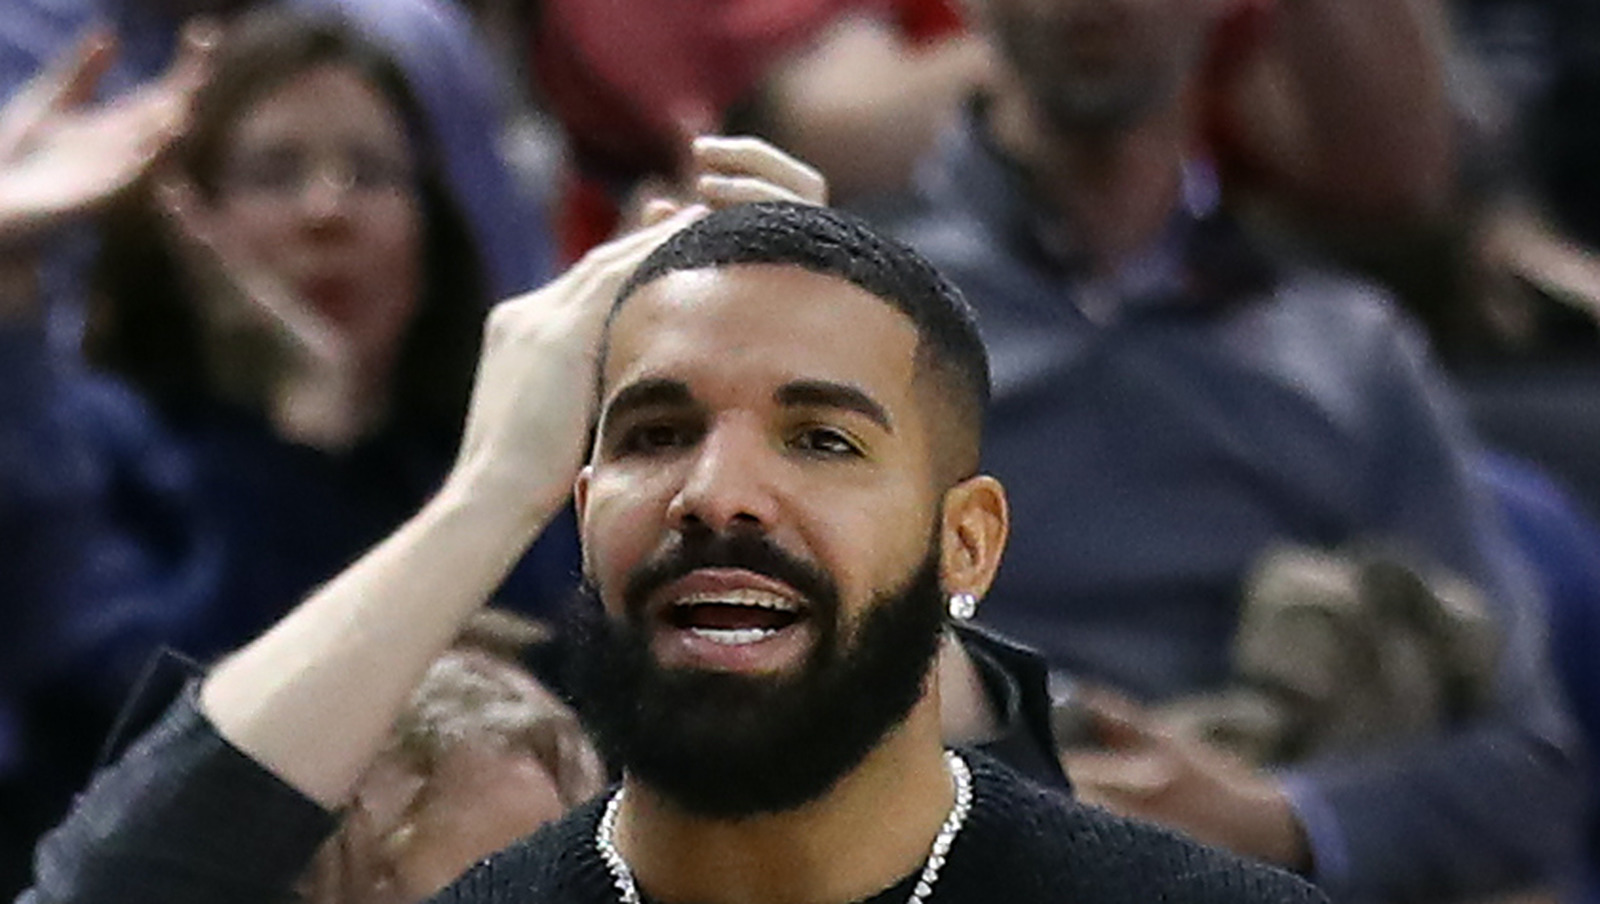 Drake's State Farm Commercial Has Twitter Cracking Up